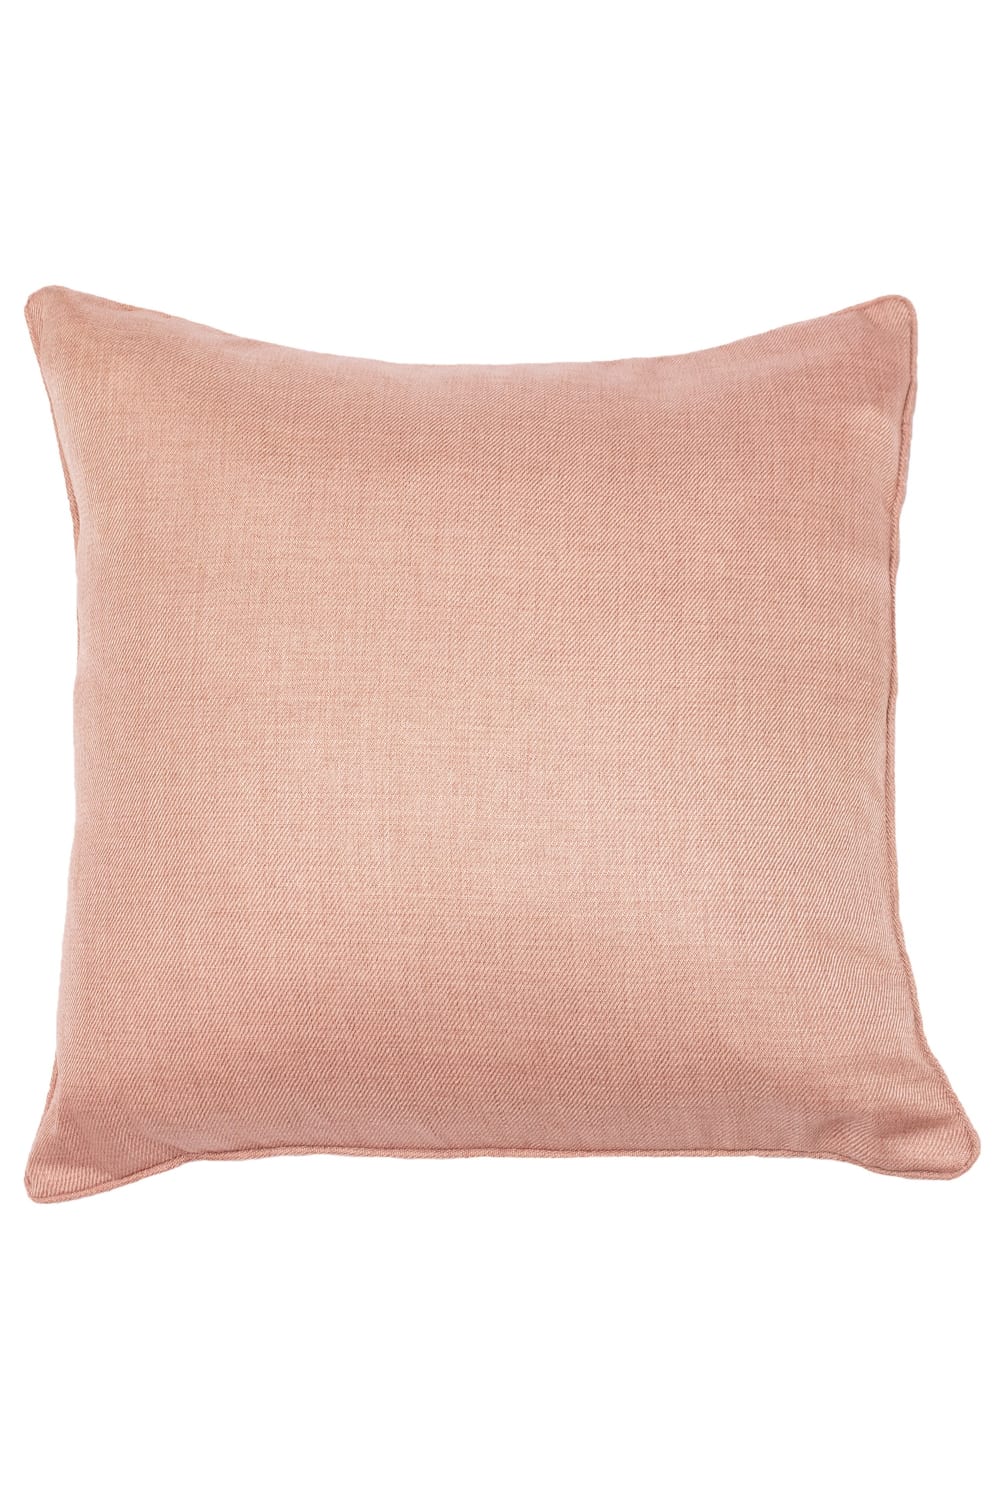 Riva Home Atlantic Cushion Cover (Blush Pink) (20 x 20in)